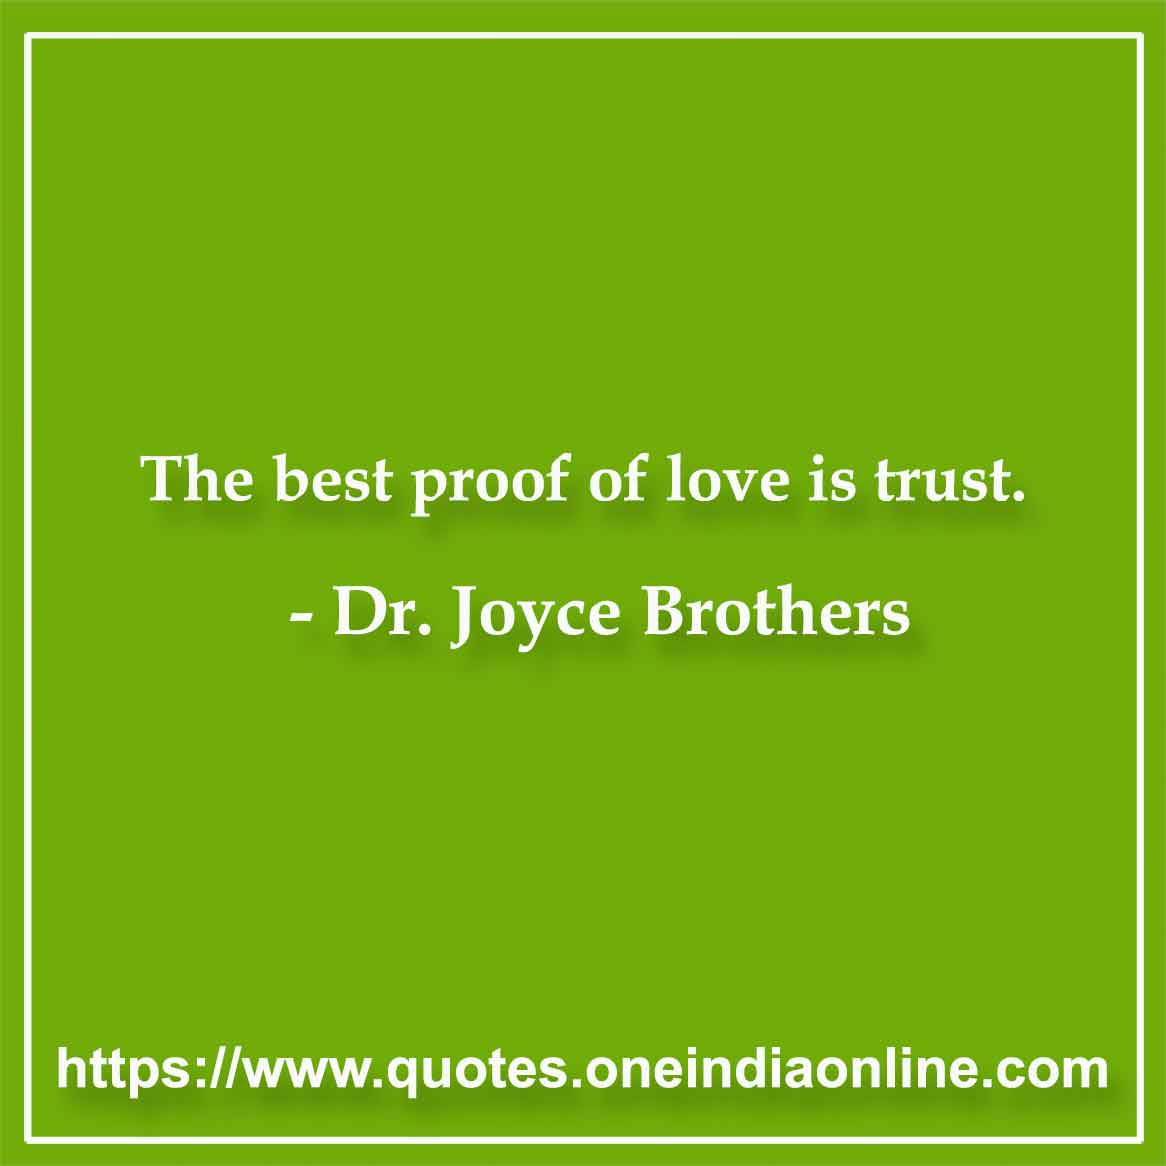 The best proof of love is trust.

-  by Dr. Joyce Brothers